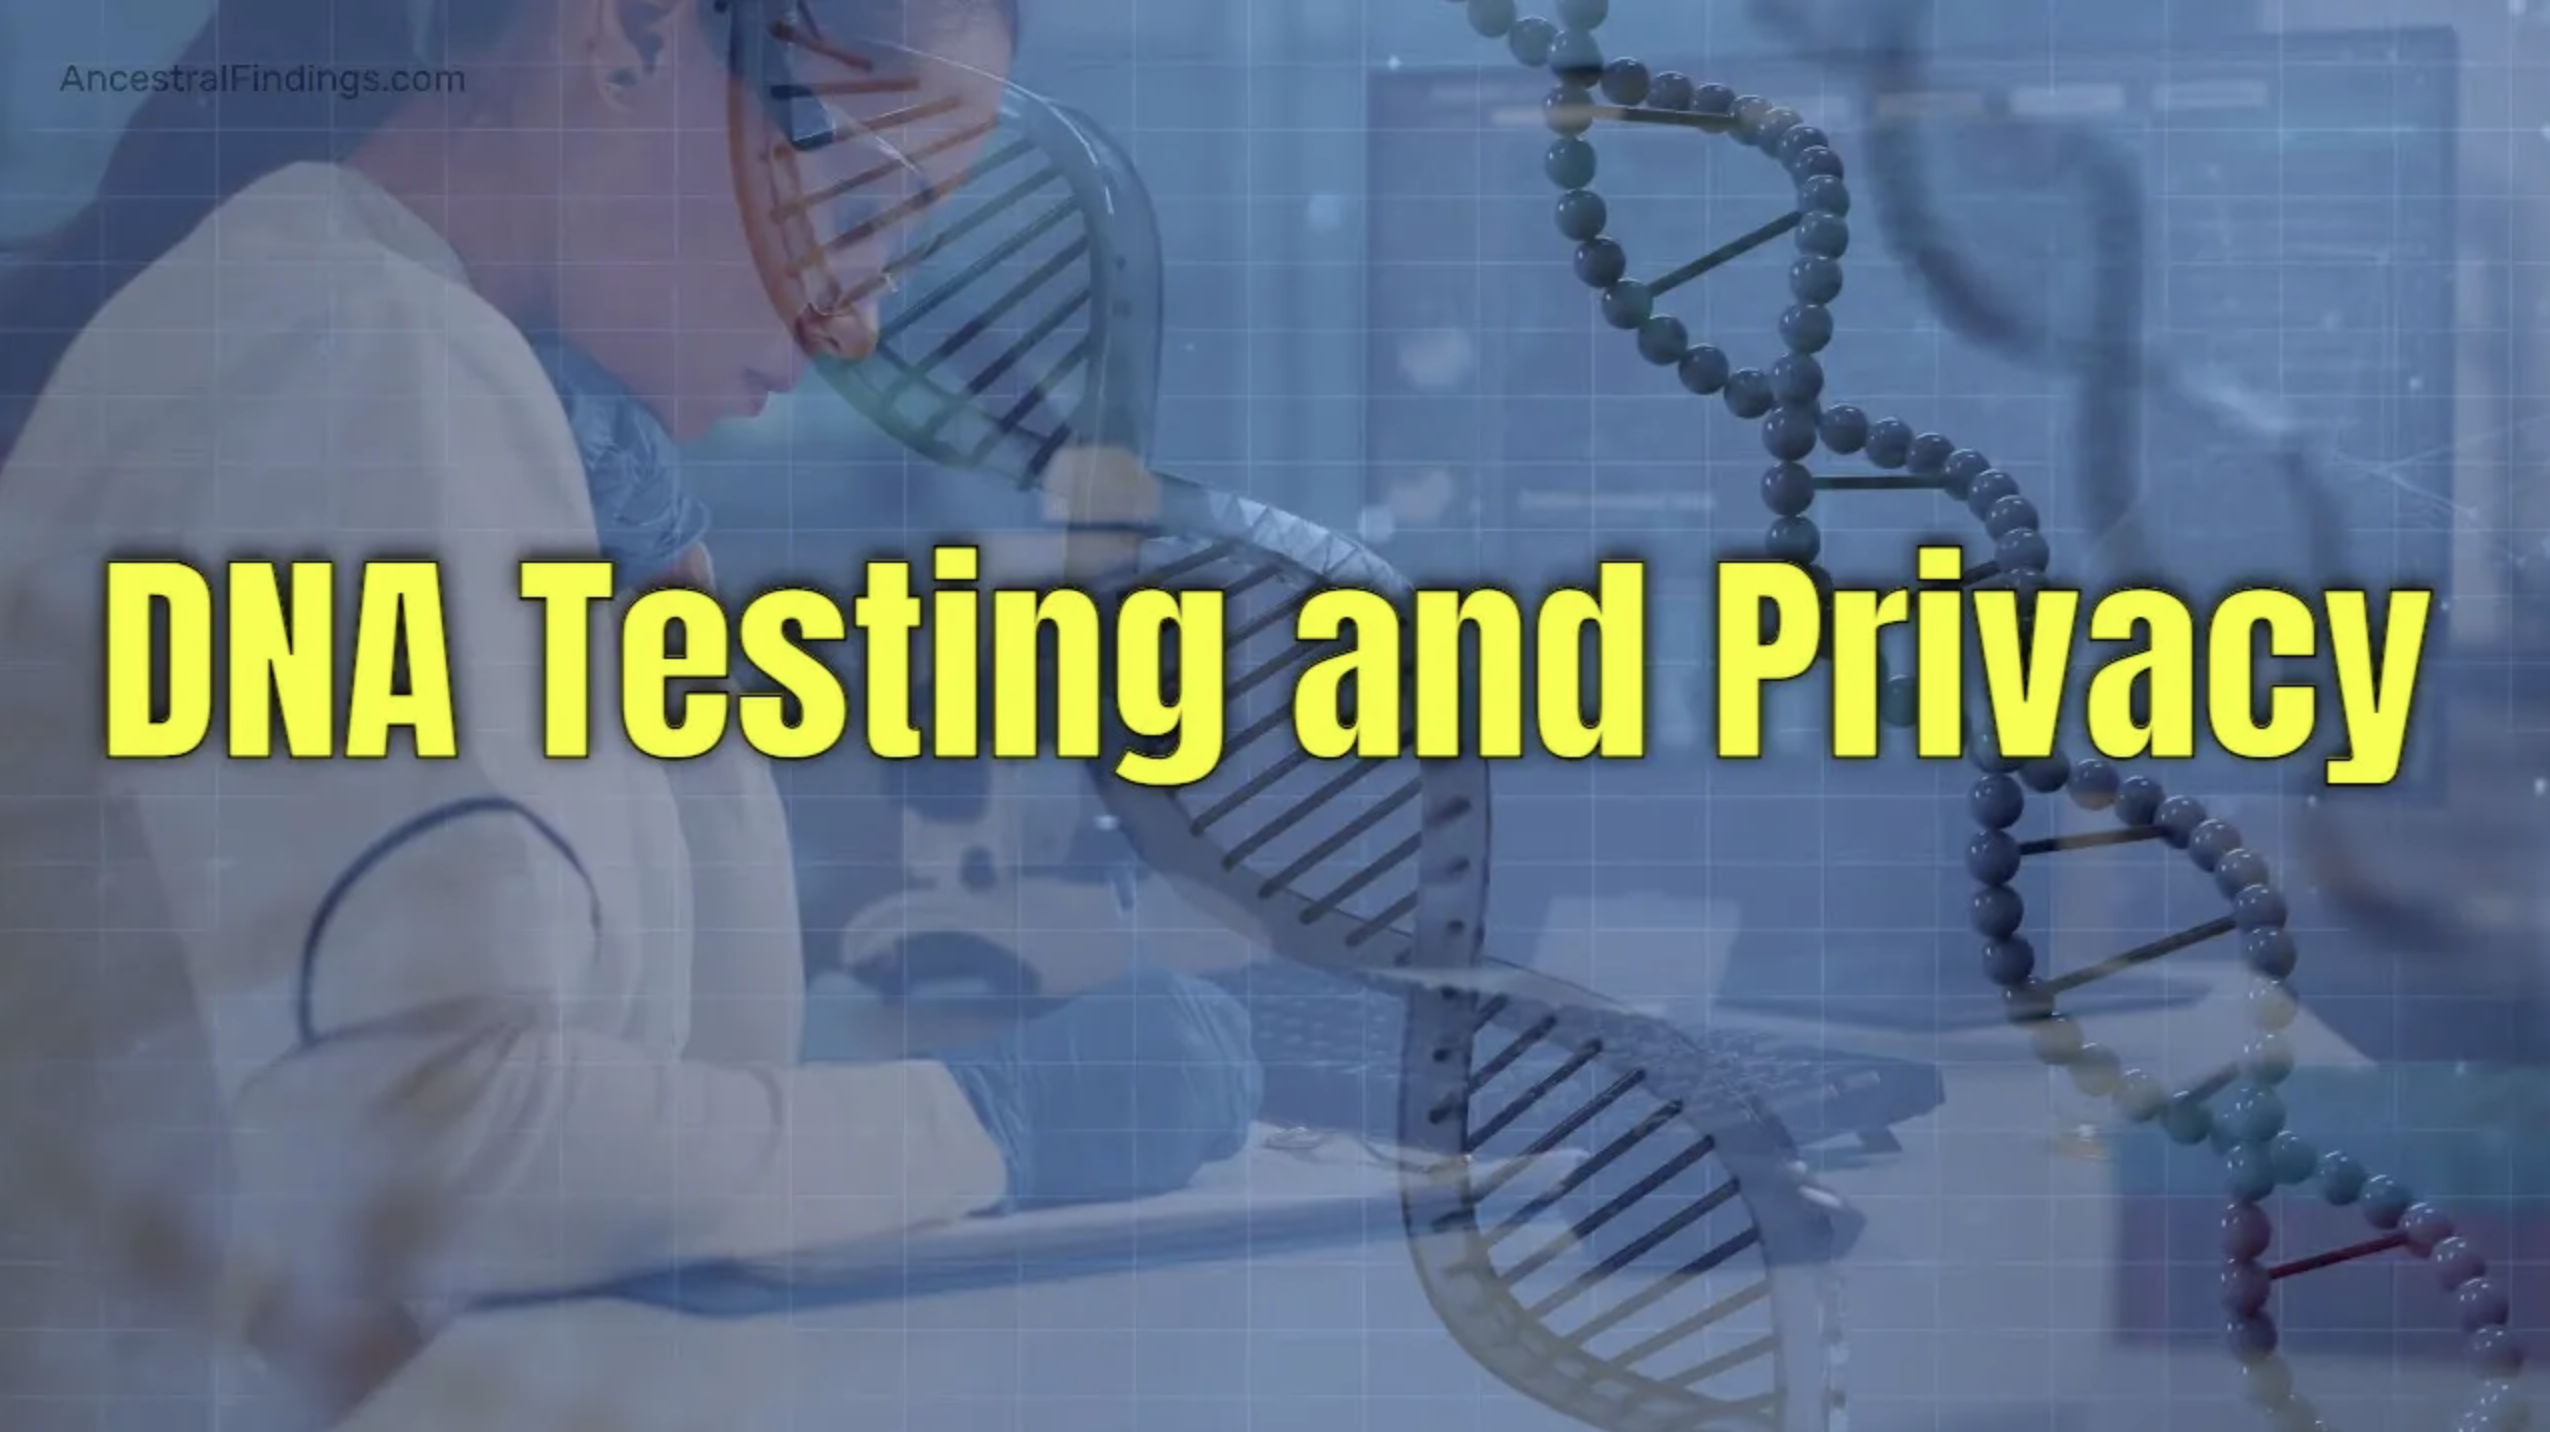 What You Need to Know About DNA Testing and Privacy